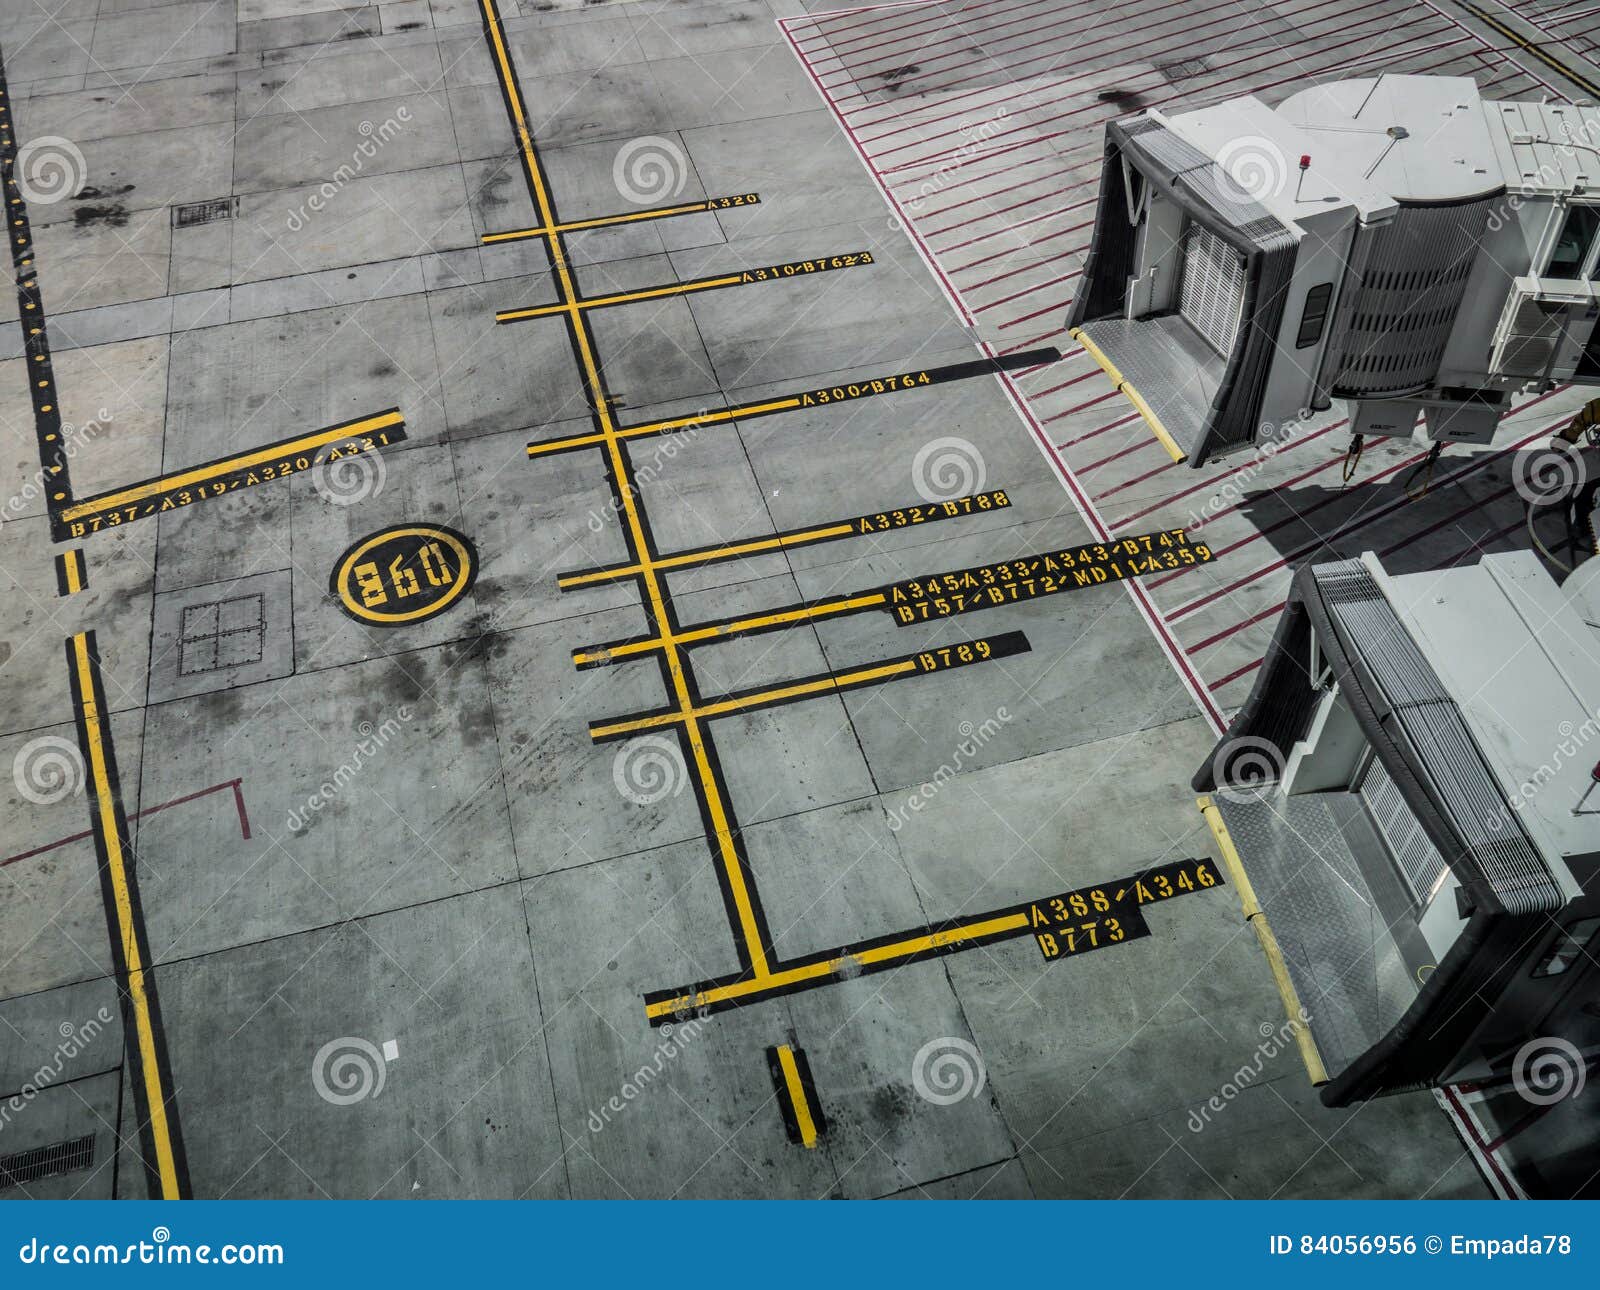 parking distances for airplanes and airbridges